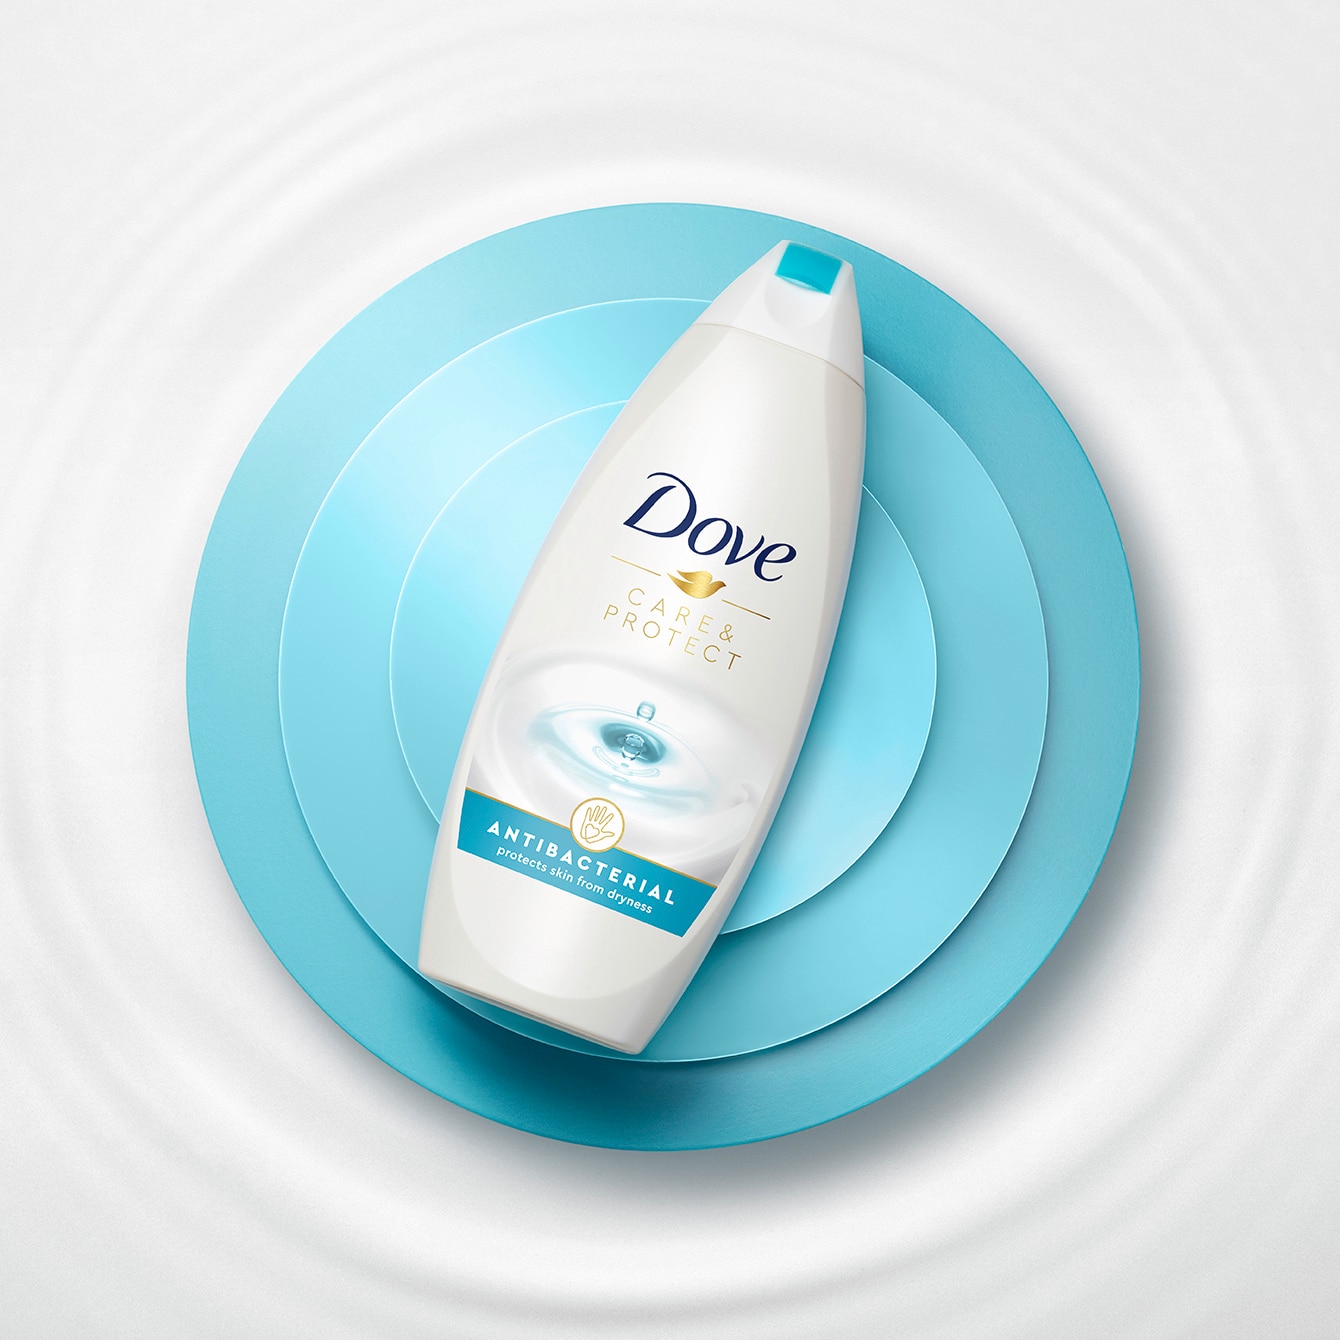 Dove Build your everyday #SelfCare routine